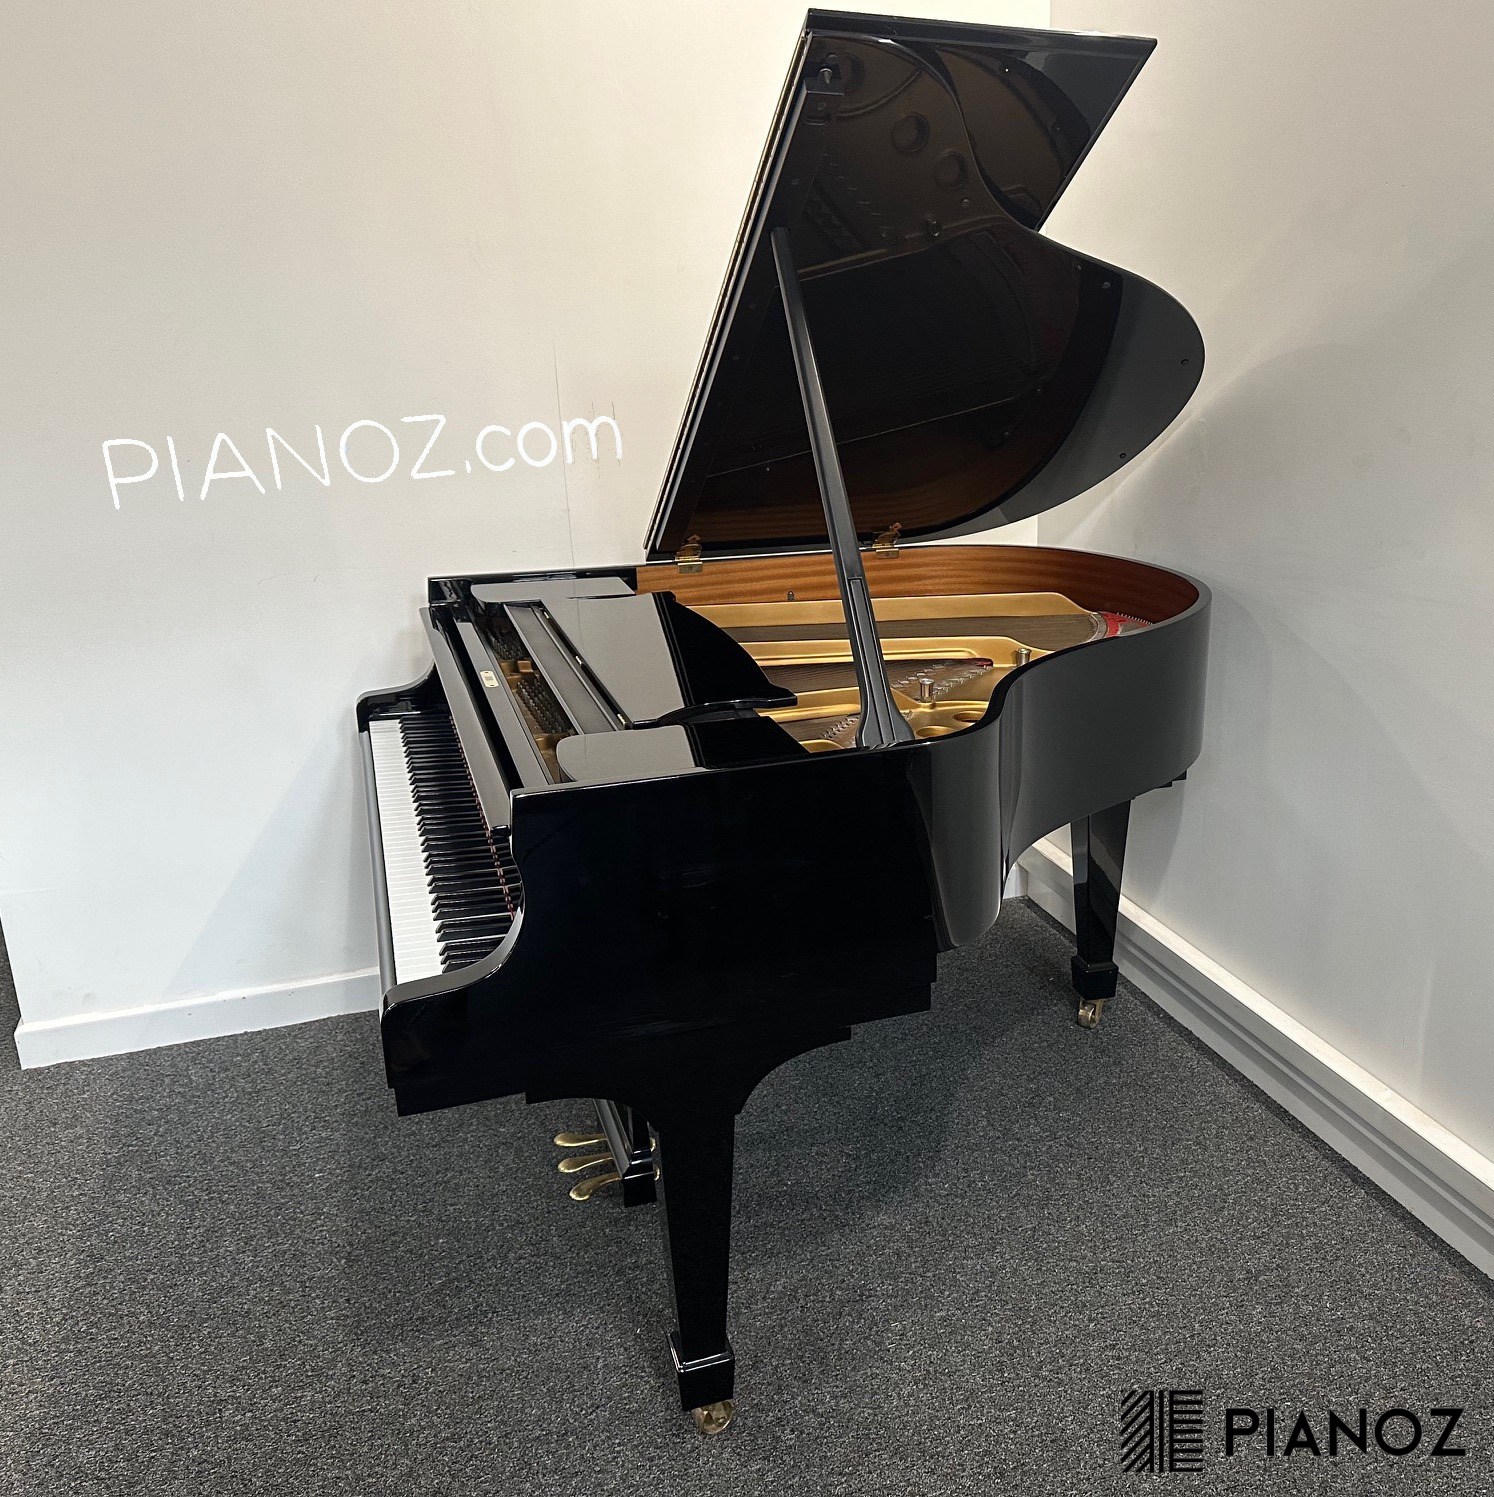 Steinway & Sons Model S Year 2000 Baby Grand Piano piano for sale in UK